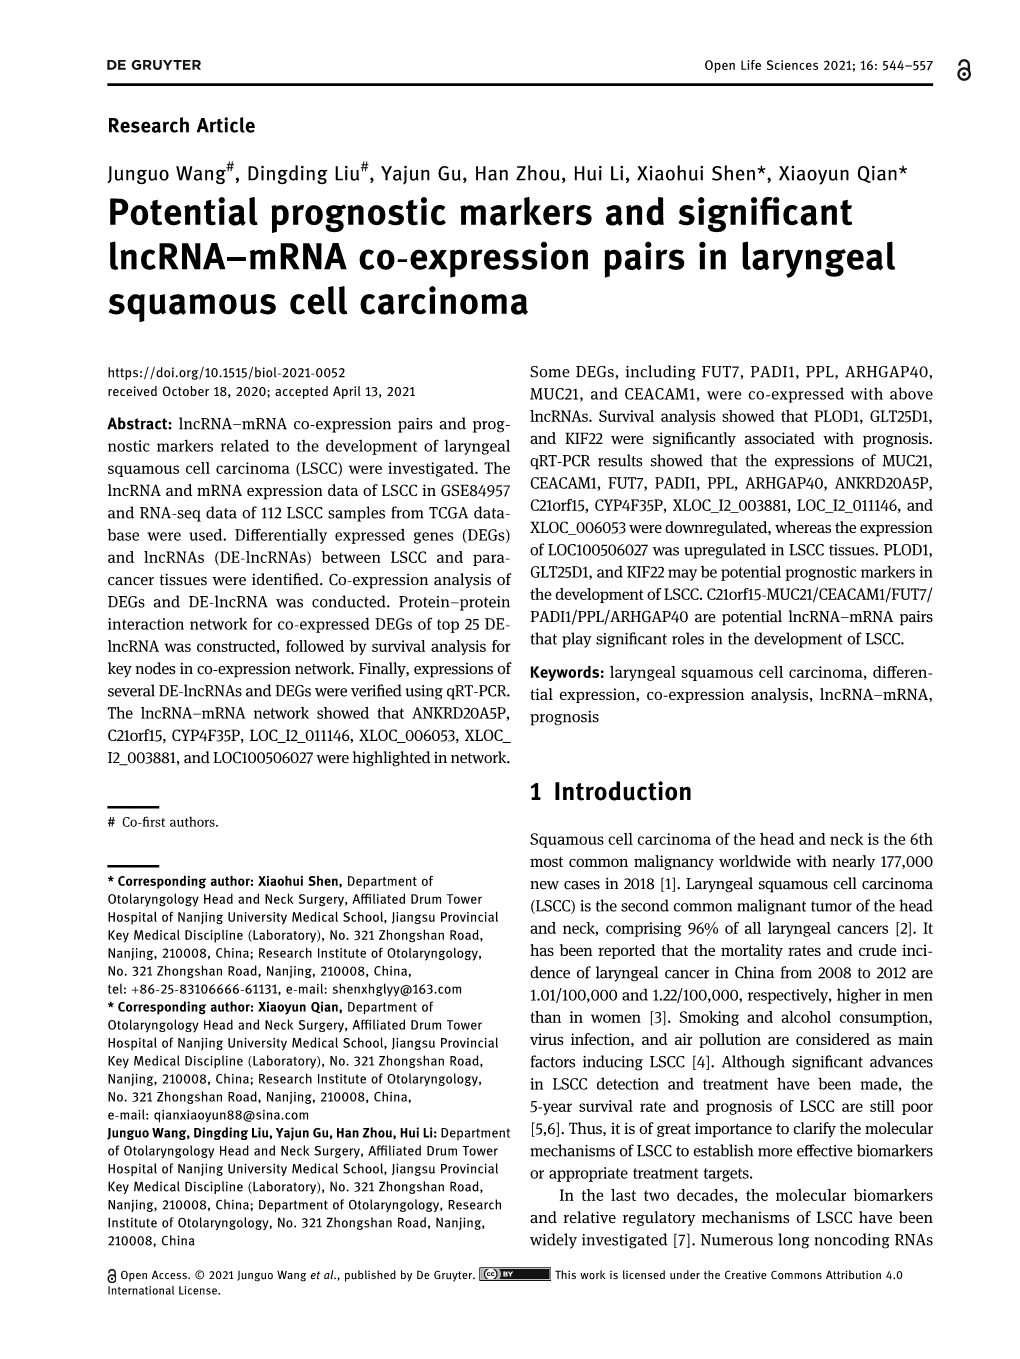 Potential Prognostic Markers and Significant Lncrna–Mrna Co